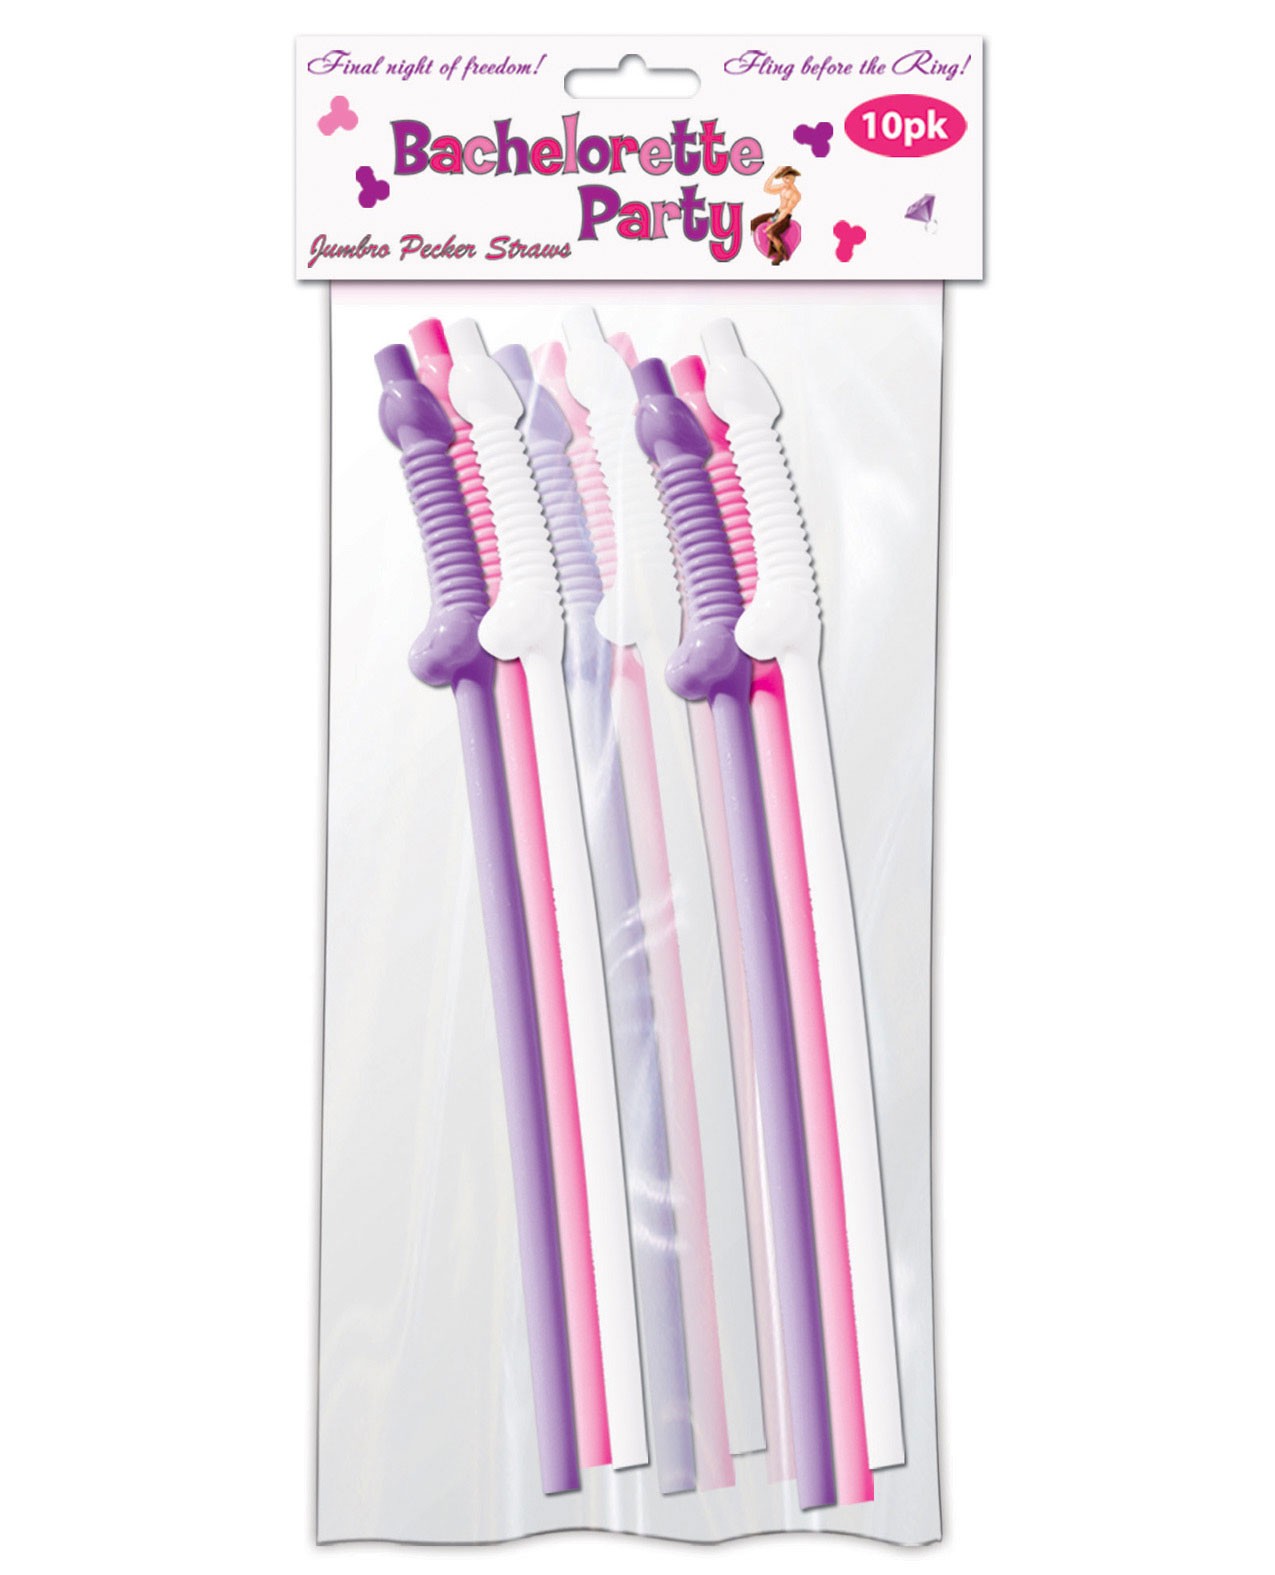 https://www.shopcupids.com/5037/bachelorette-party-pecker-sipping-straws-assorted-colors-pack-of-10.jpg